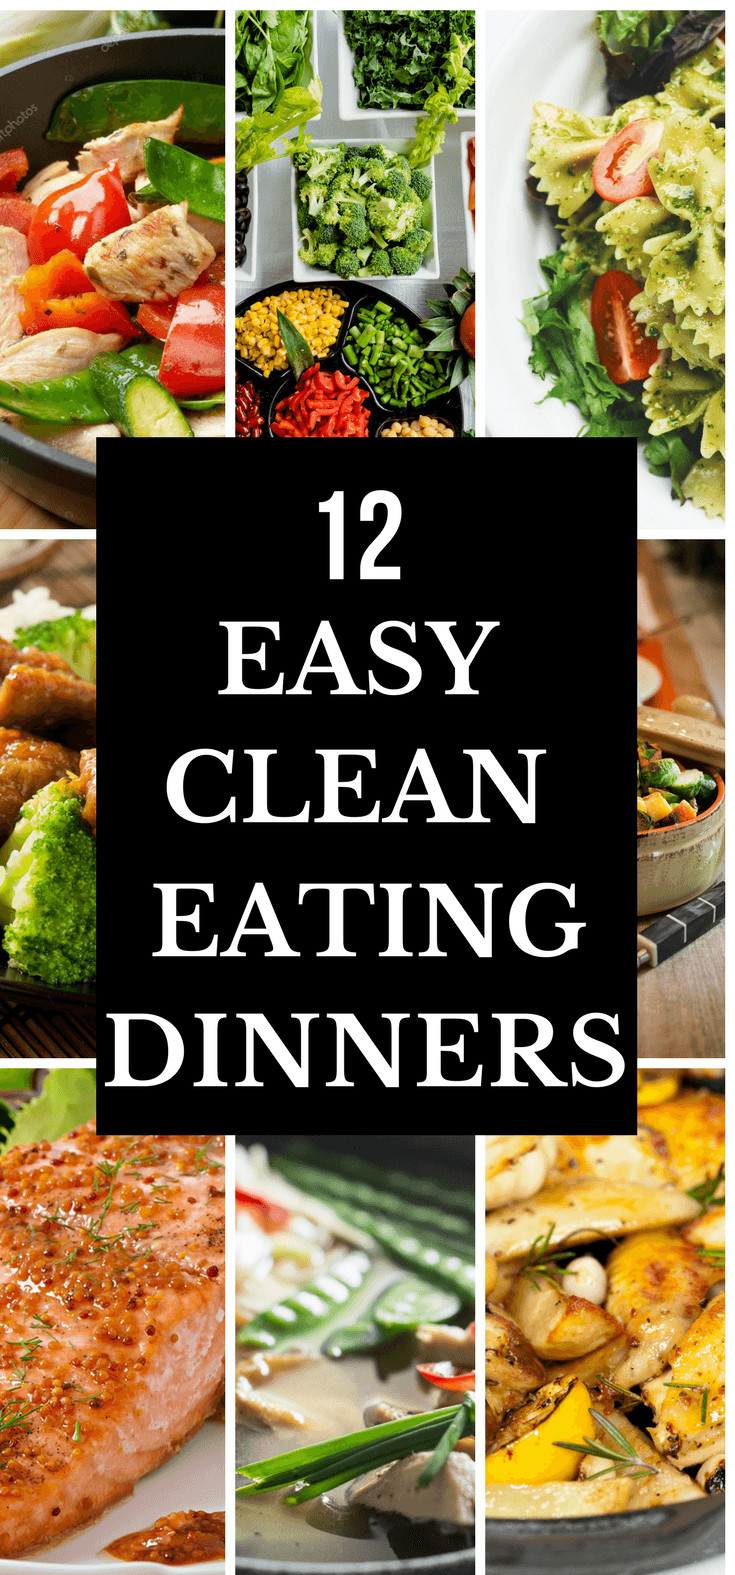 Clean Dinner Recipes
 12 Easy Clean Eating Dinner Recipes Ready To Eat In 30 Minutes